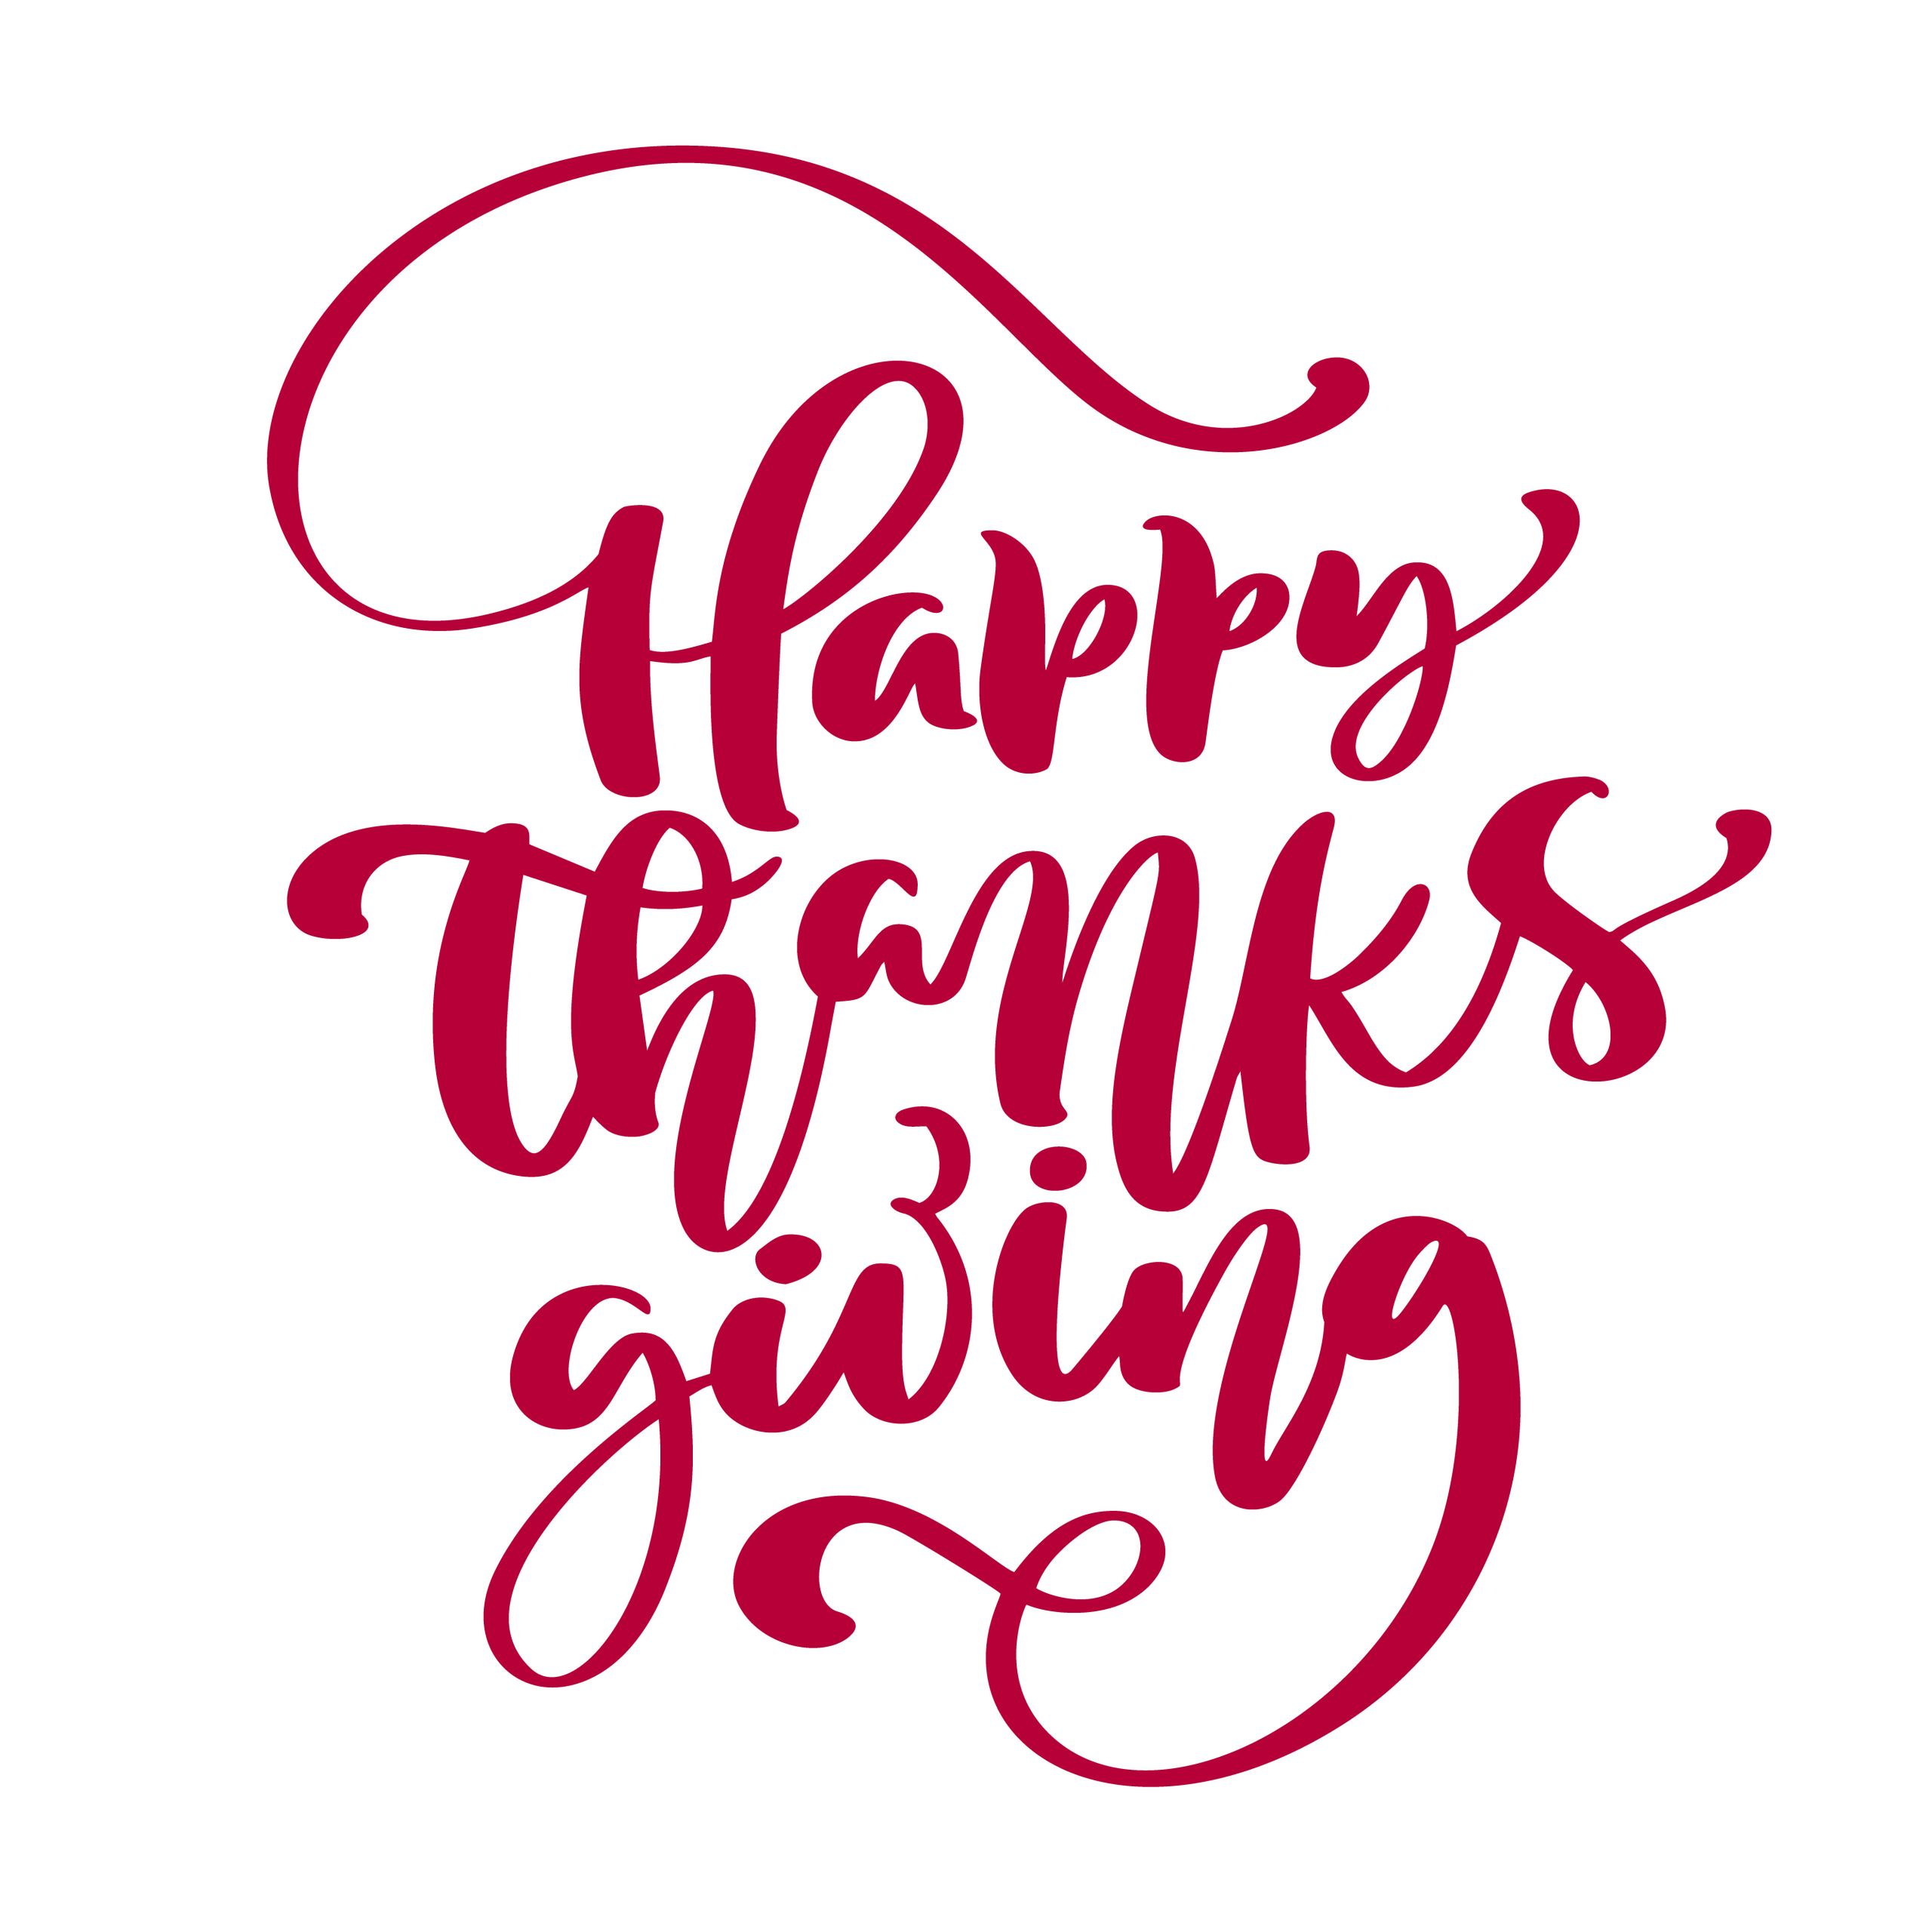 Thanksgiving Quotes Calligraphy
 Happy Thanksgiving Calligraphy Text vector Illustrated